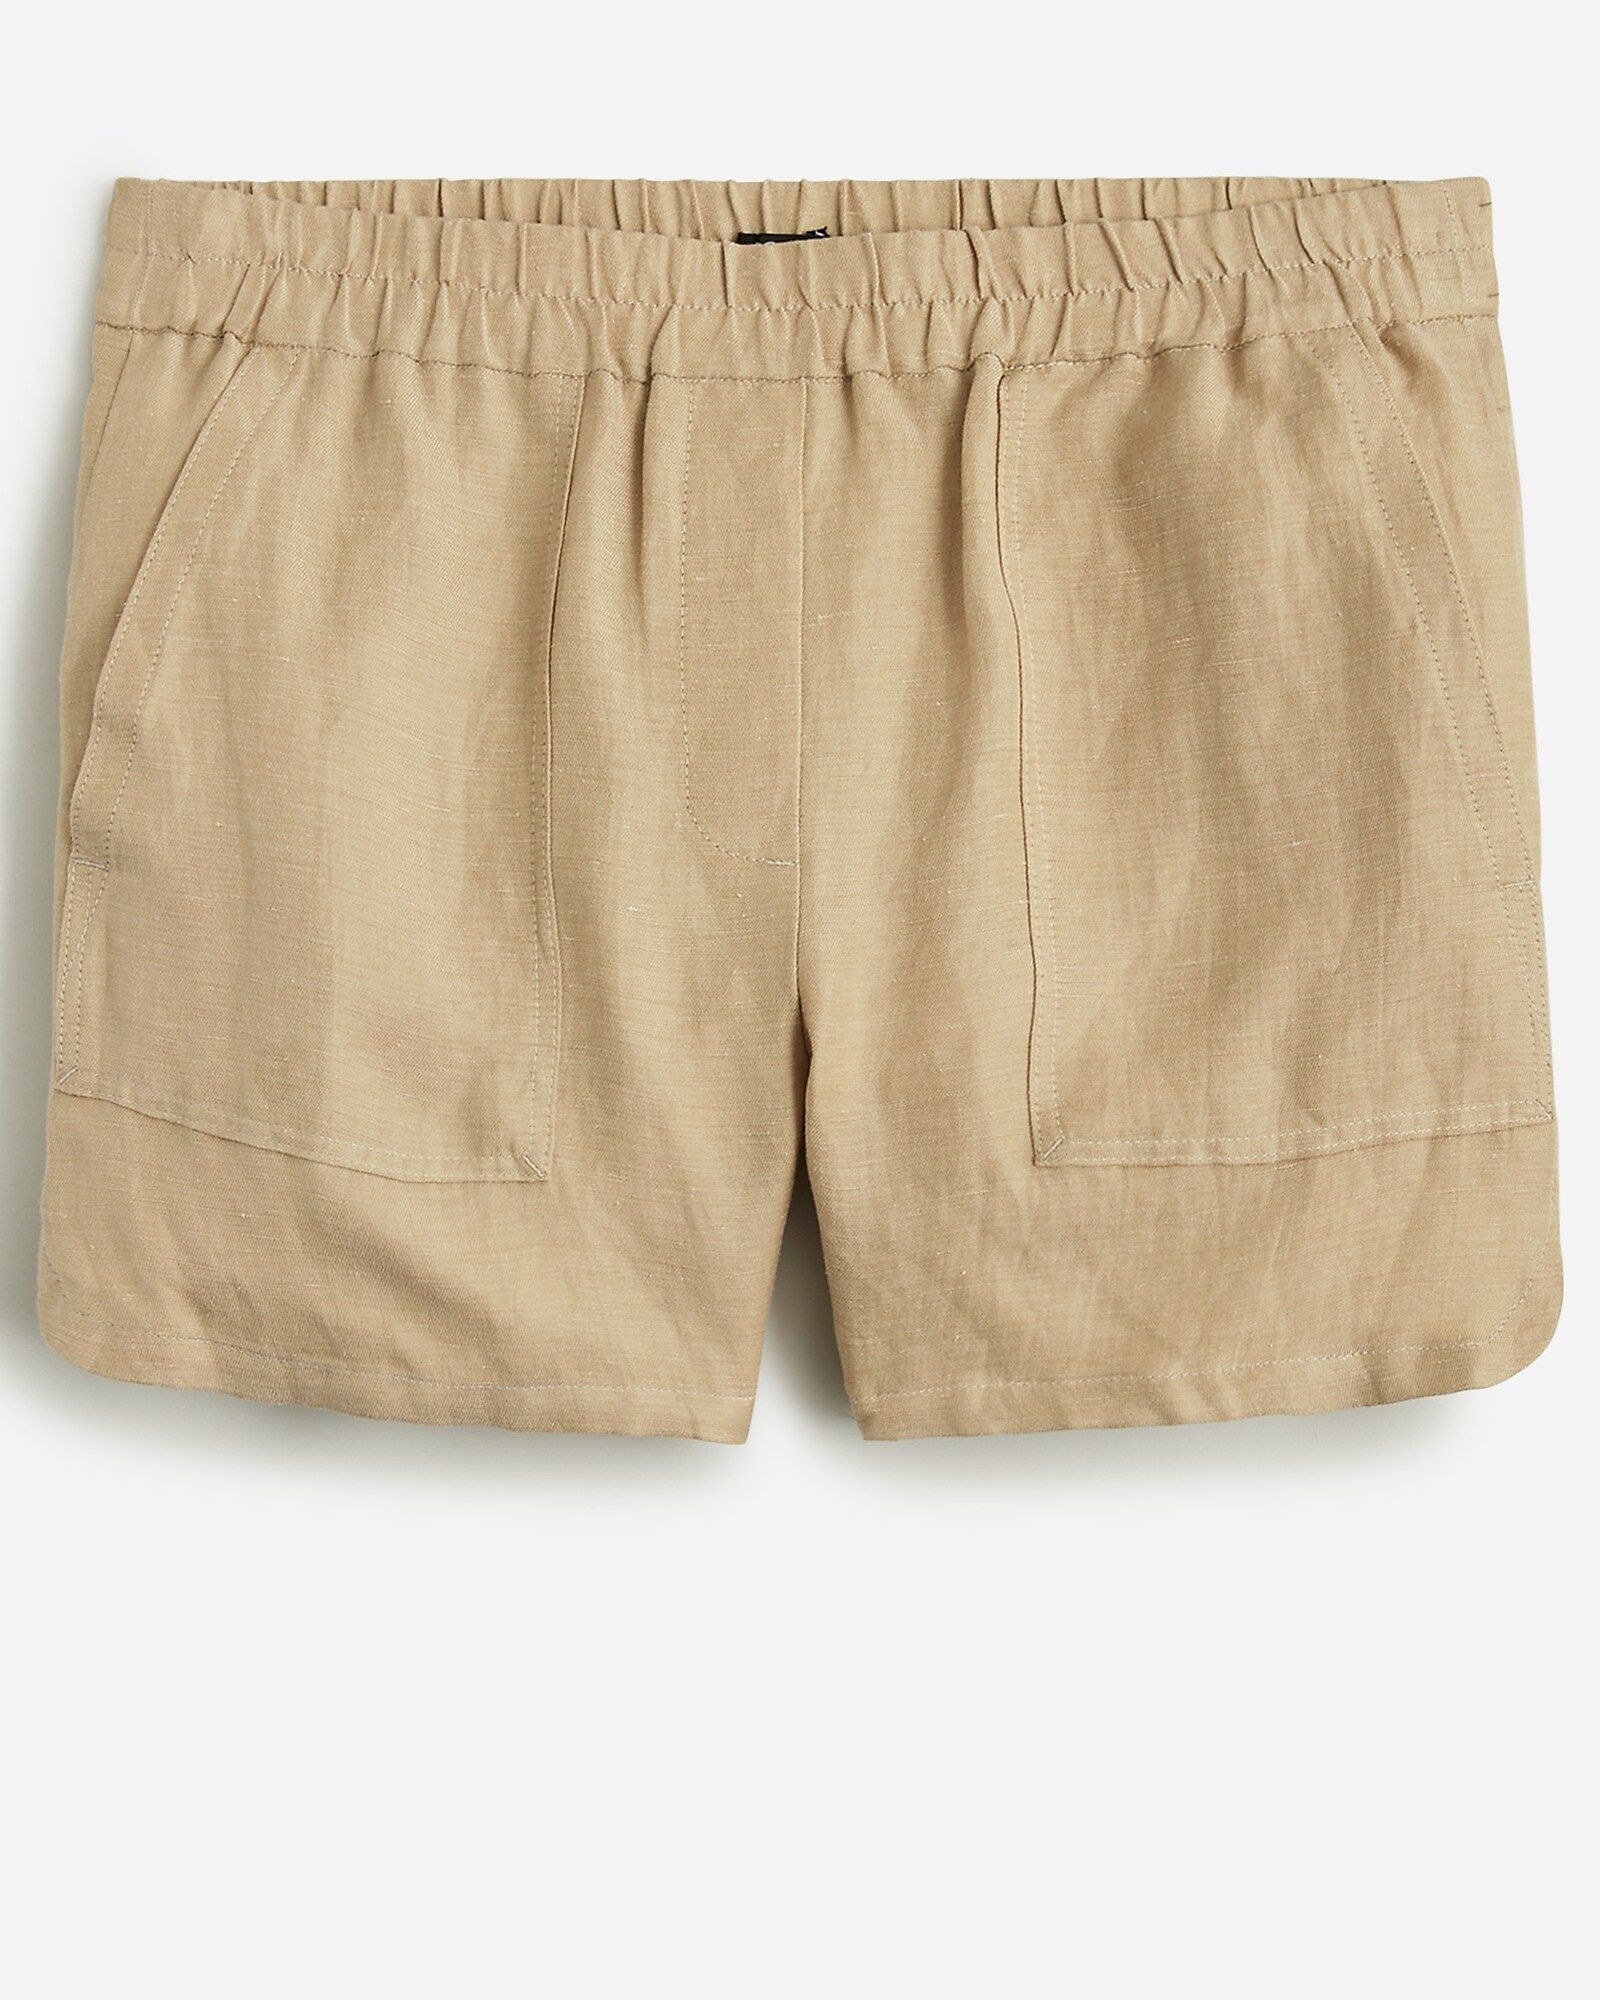 Patch-pocket pull-on short in Chelsea linen-cupro blend | J.Crew US